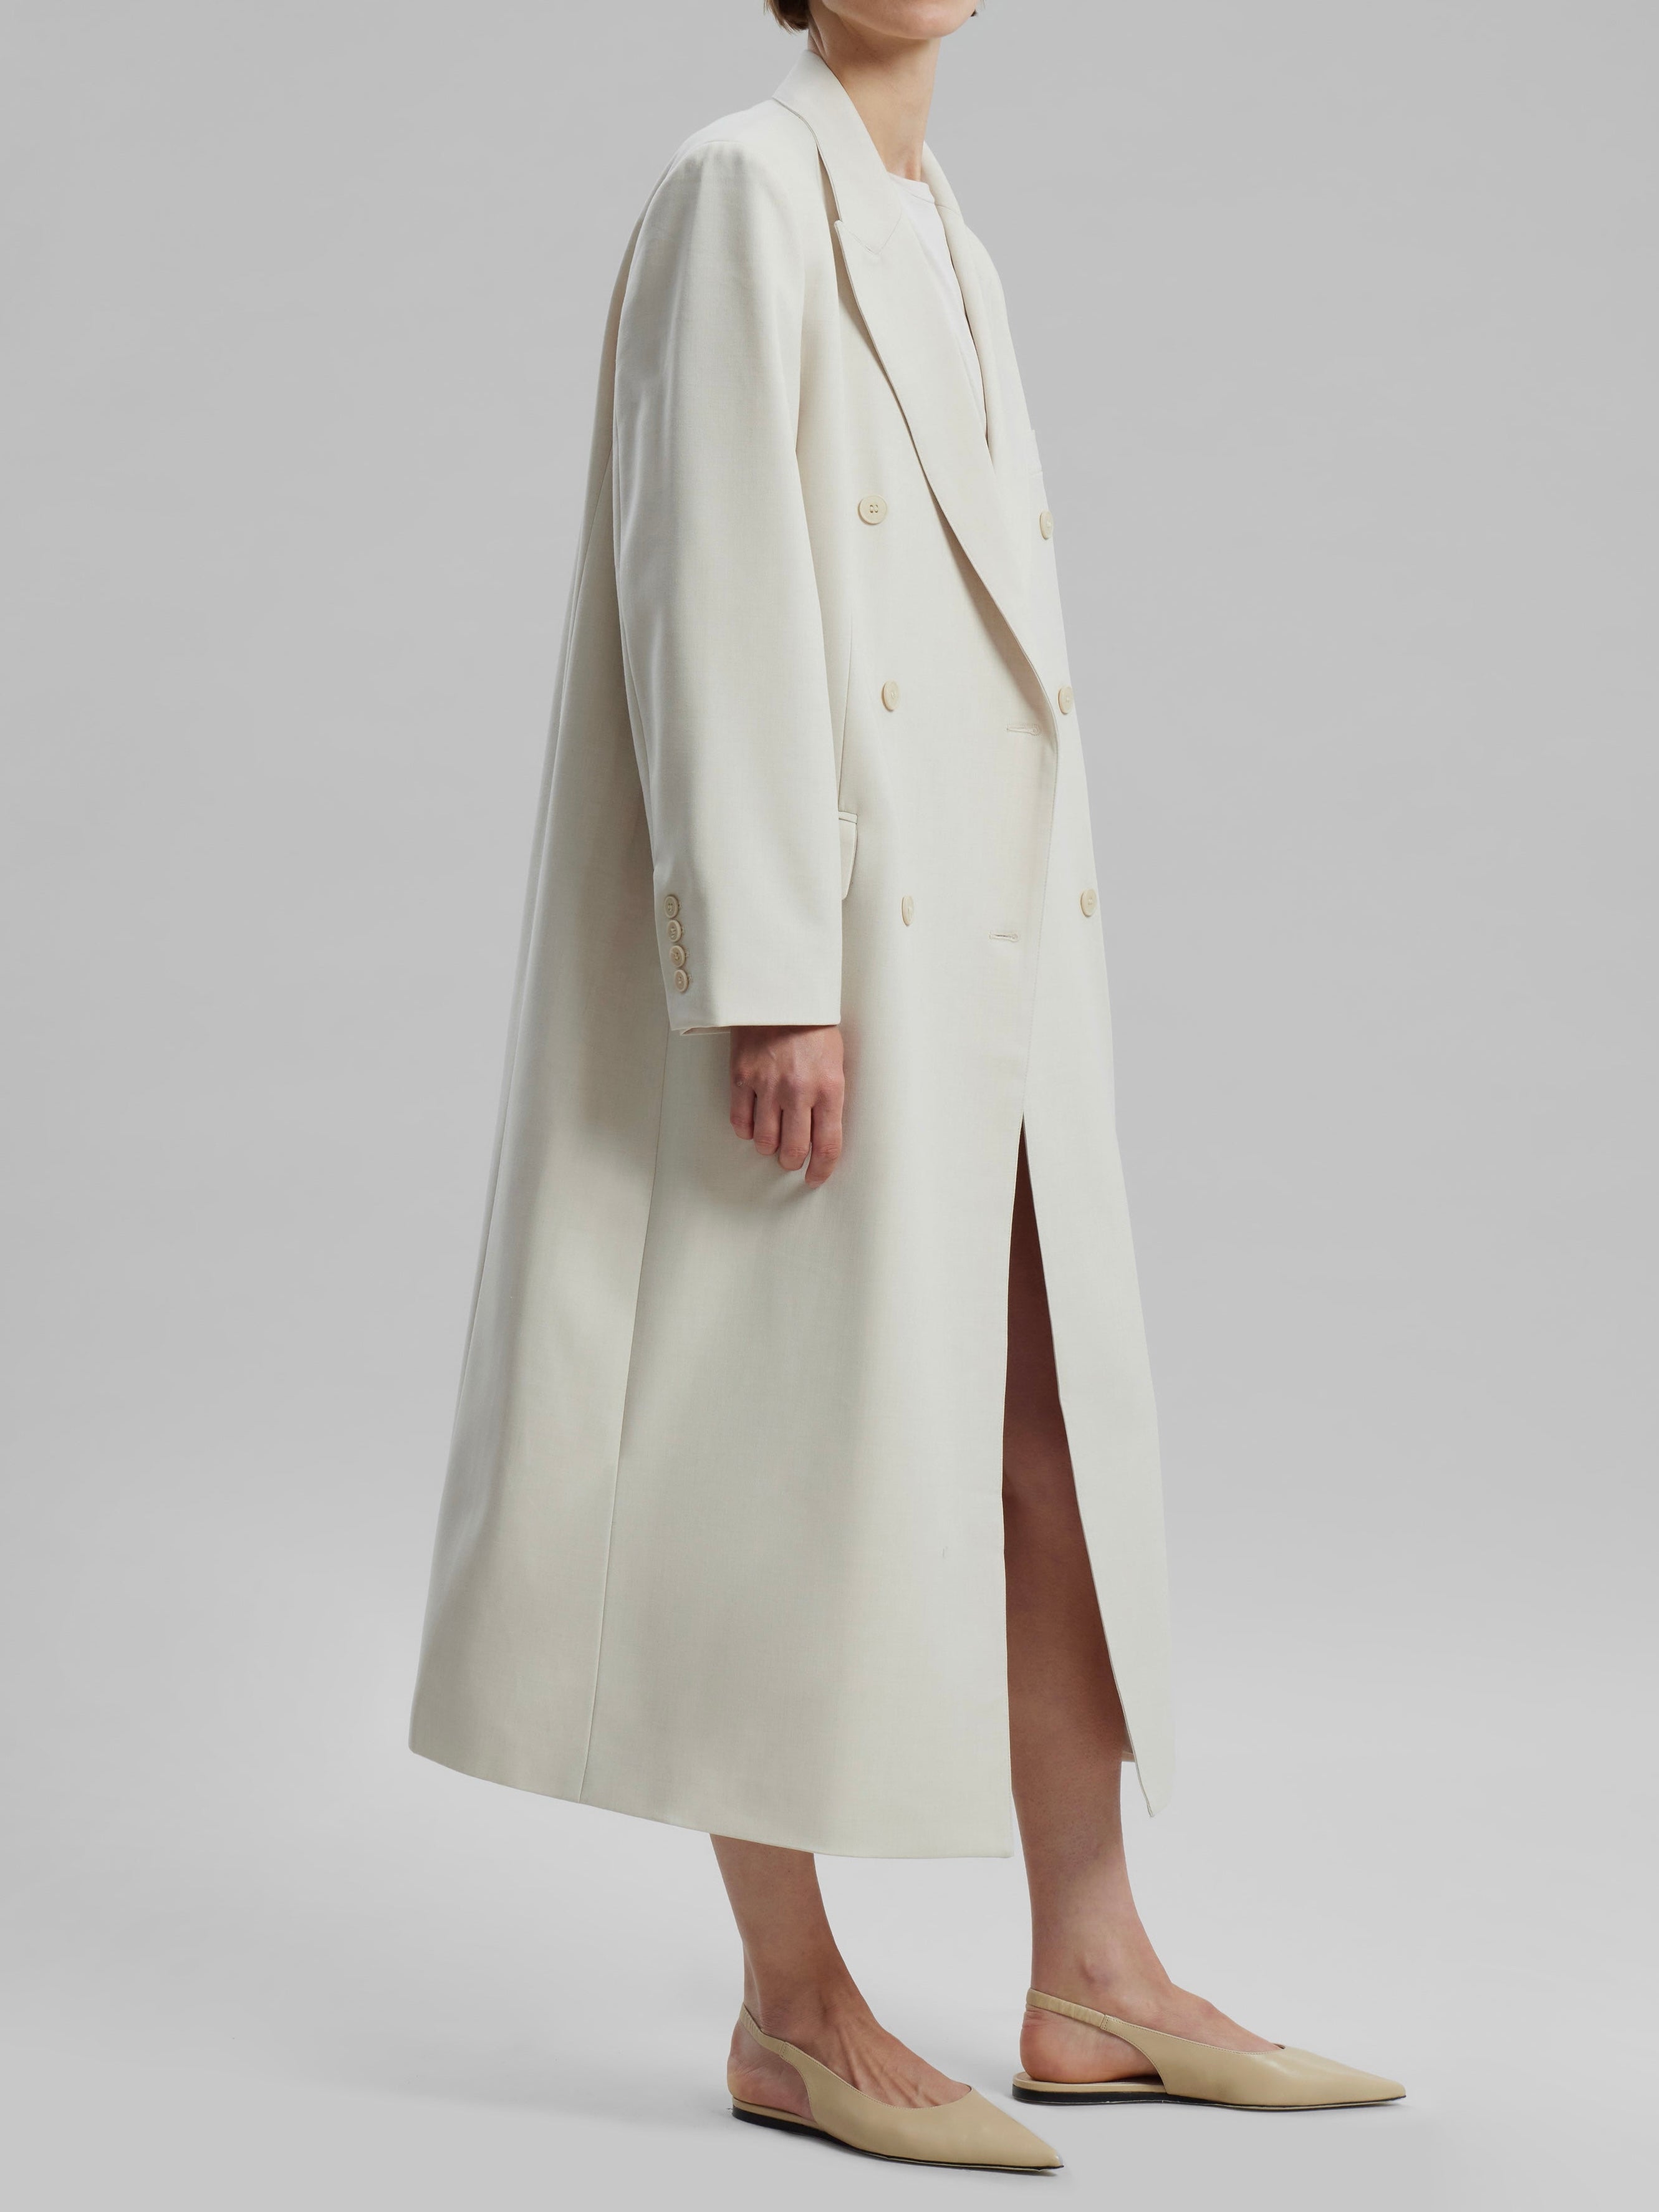 Gemma Double Breasted Coat in Eggshell